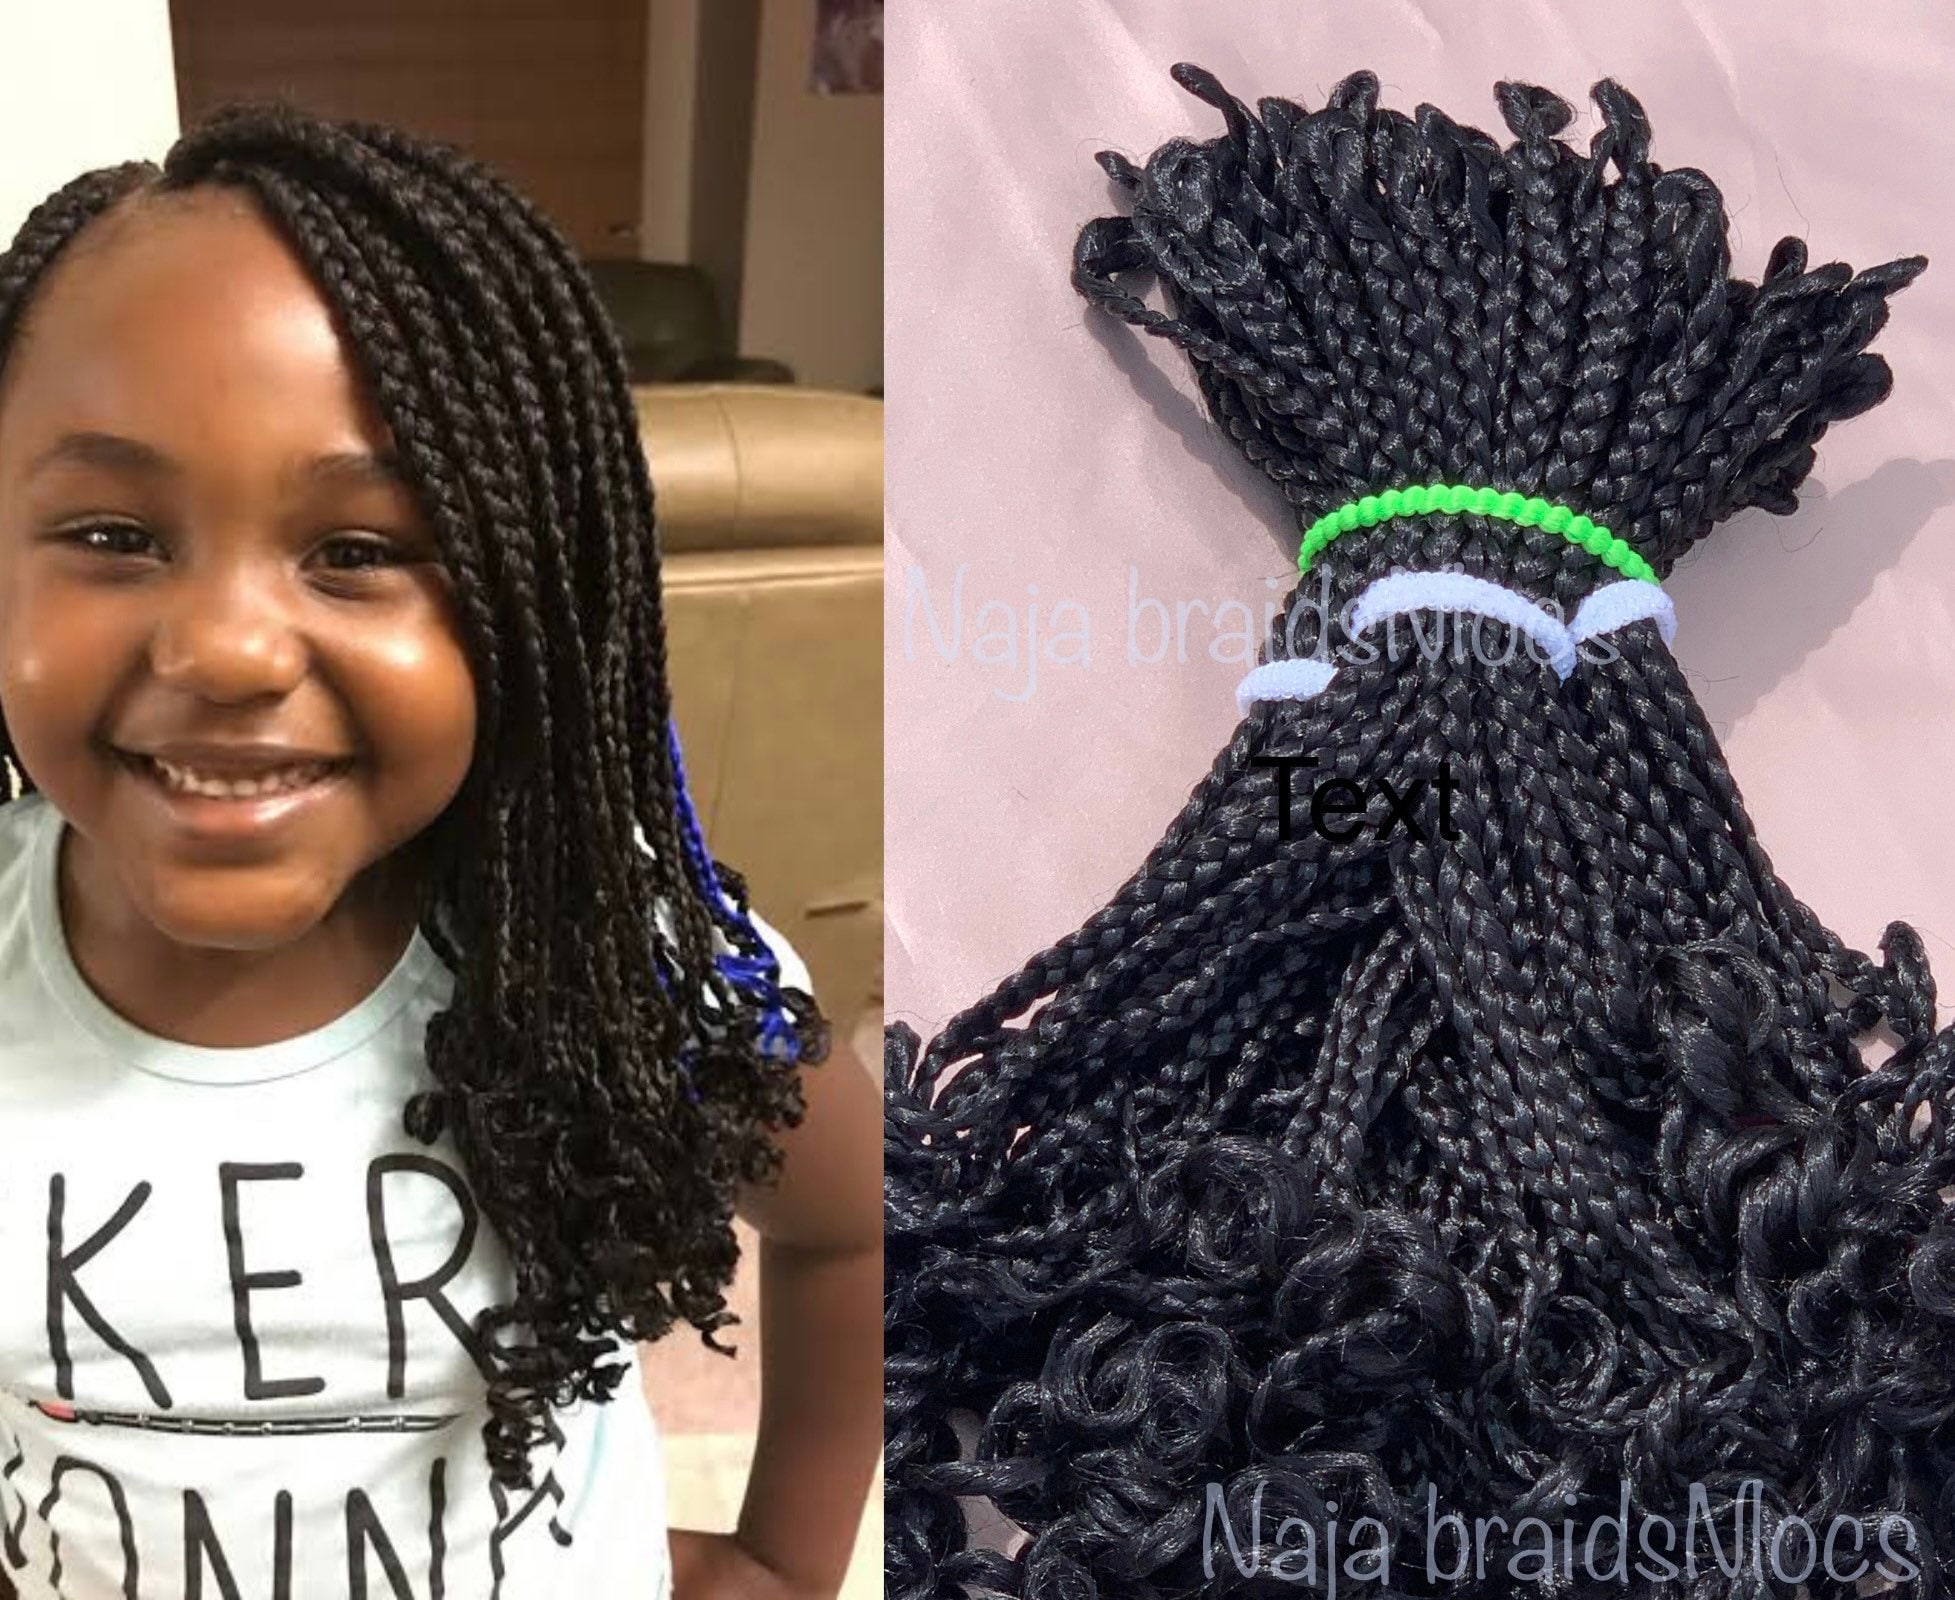 55 Enthralling Crochet Braids for Kids to Try